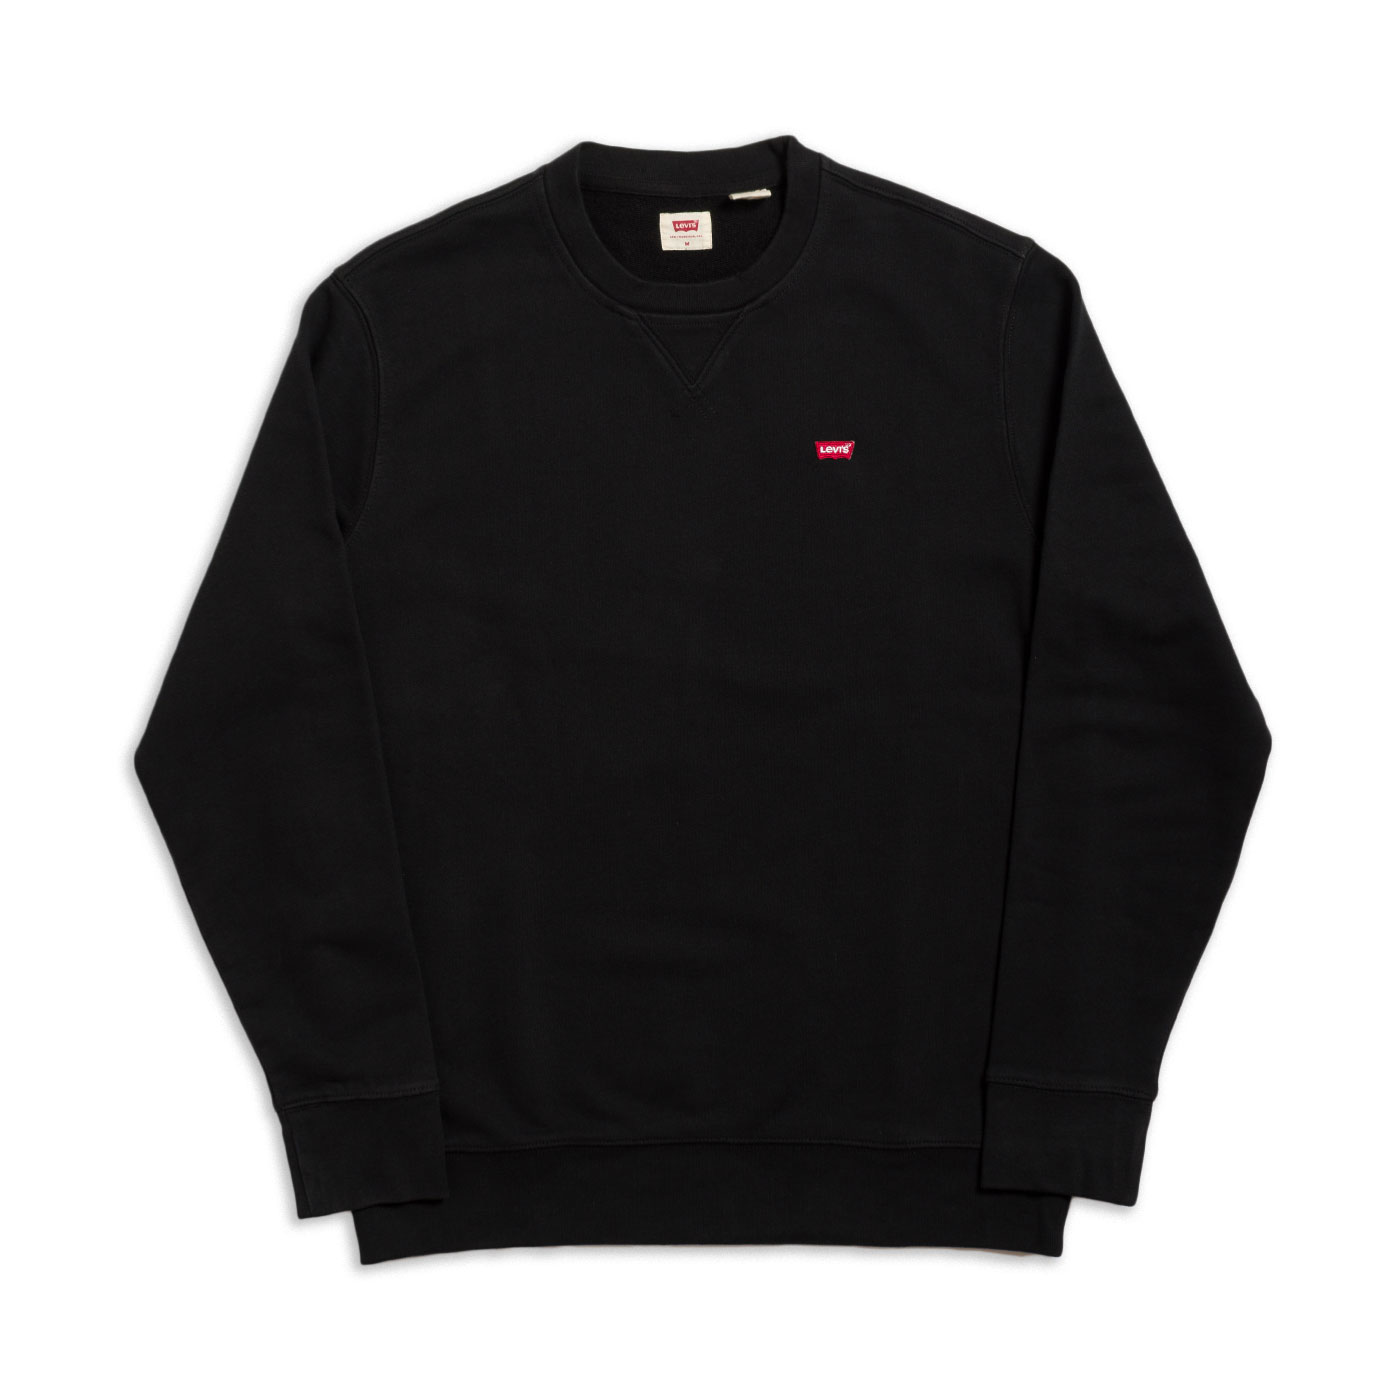 Sweater Levi's New Original Crew Sweat Mineral Black for Man | RvceShops